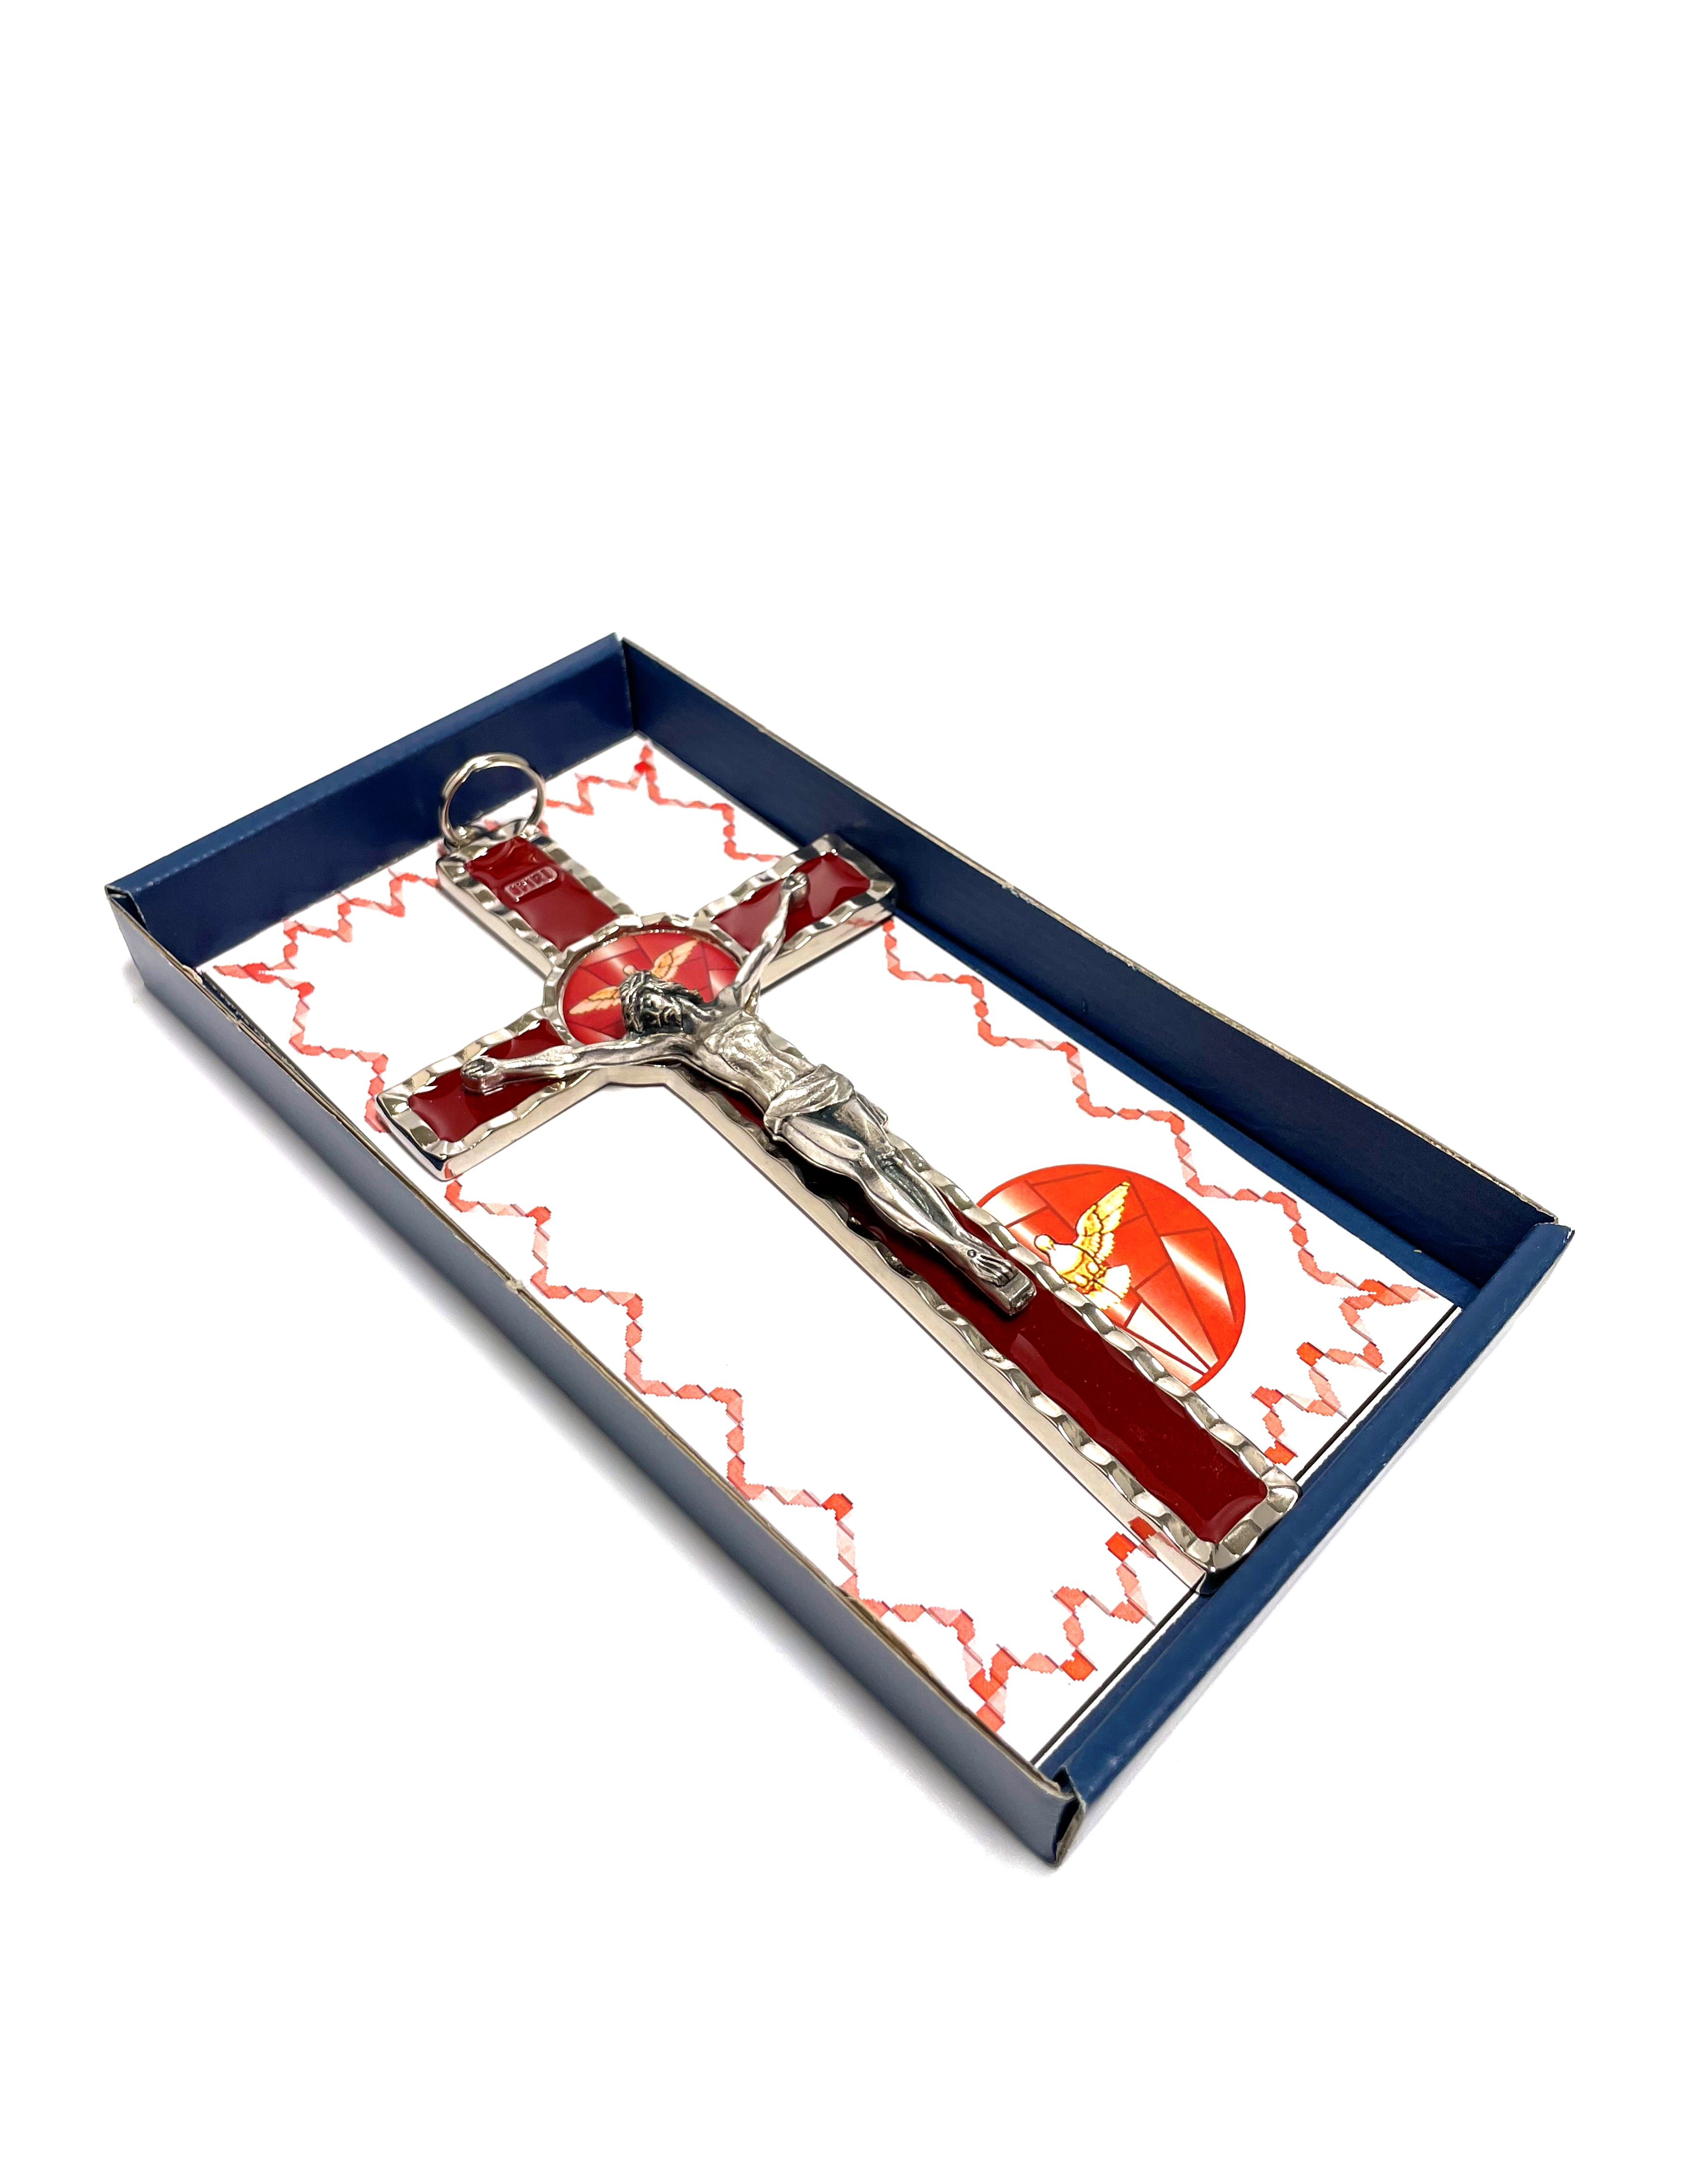 Holy Spirit Crucifix with enamel colors and gold and silver tone